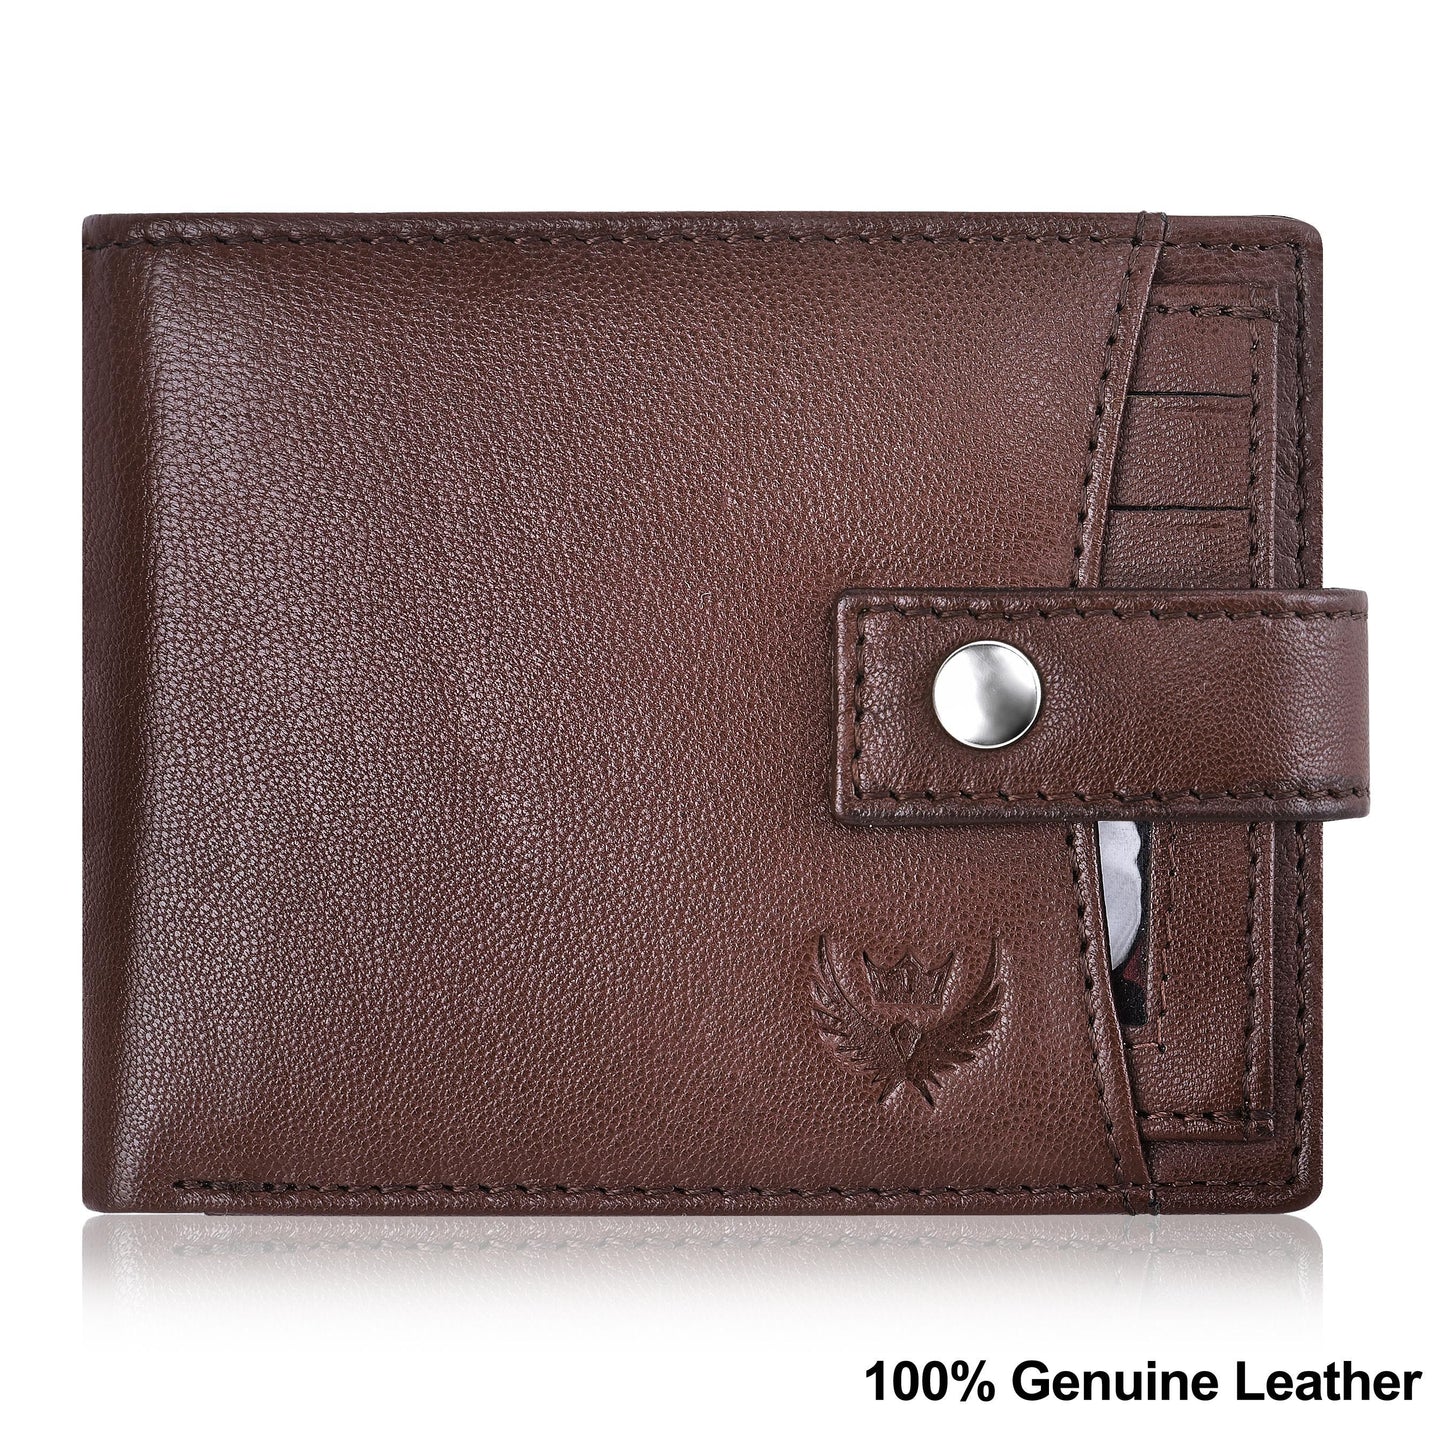 Bi-Fold Dark Brown RFID Blocking Leather Wallet for Men with External Card Holder & Coin Pocket Feature